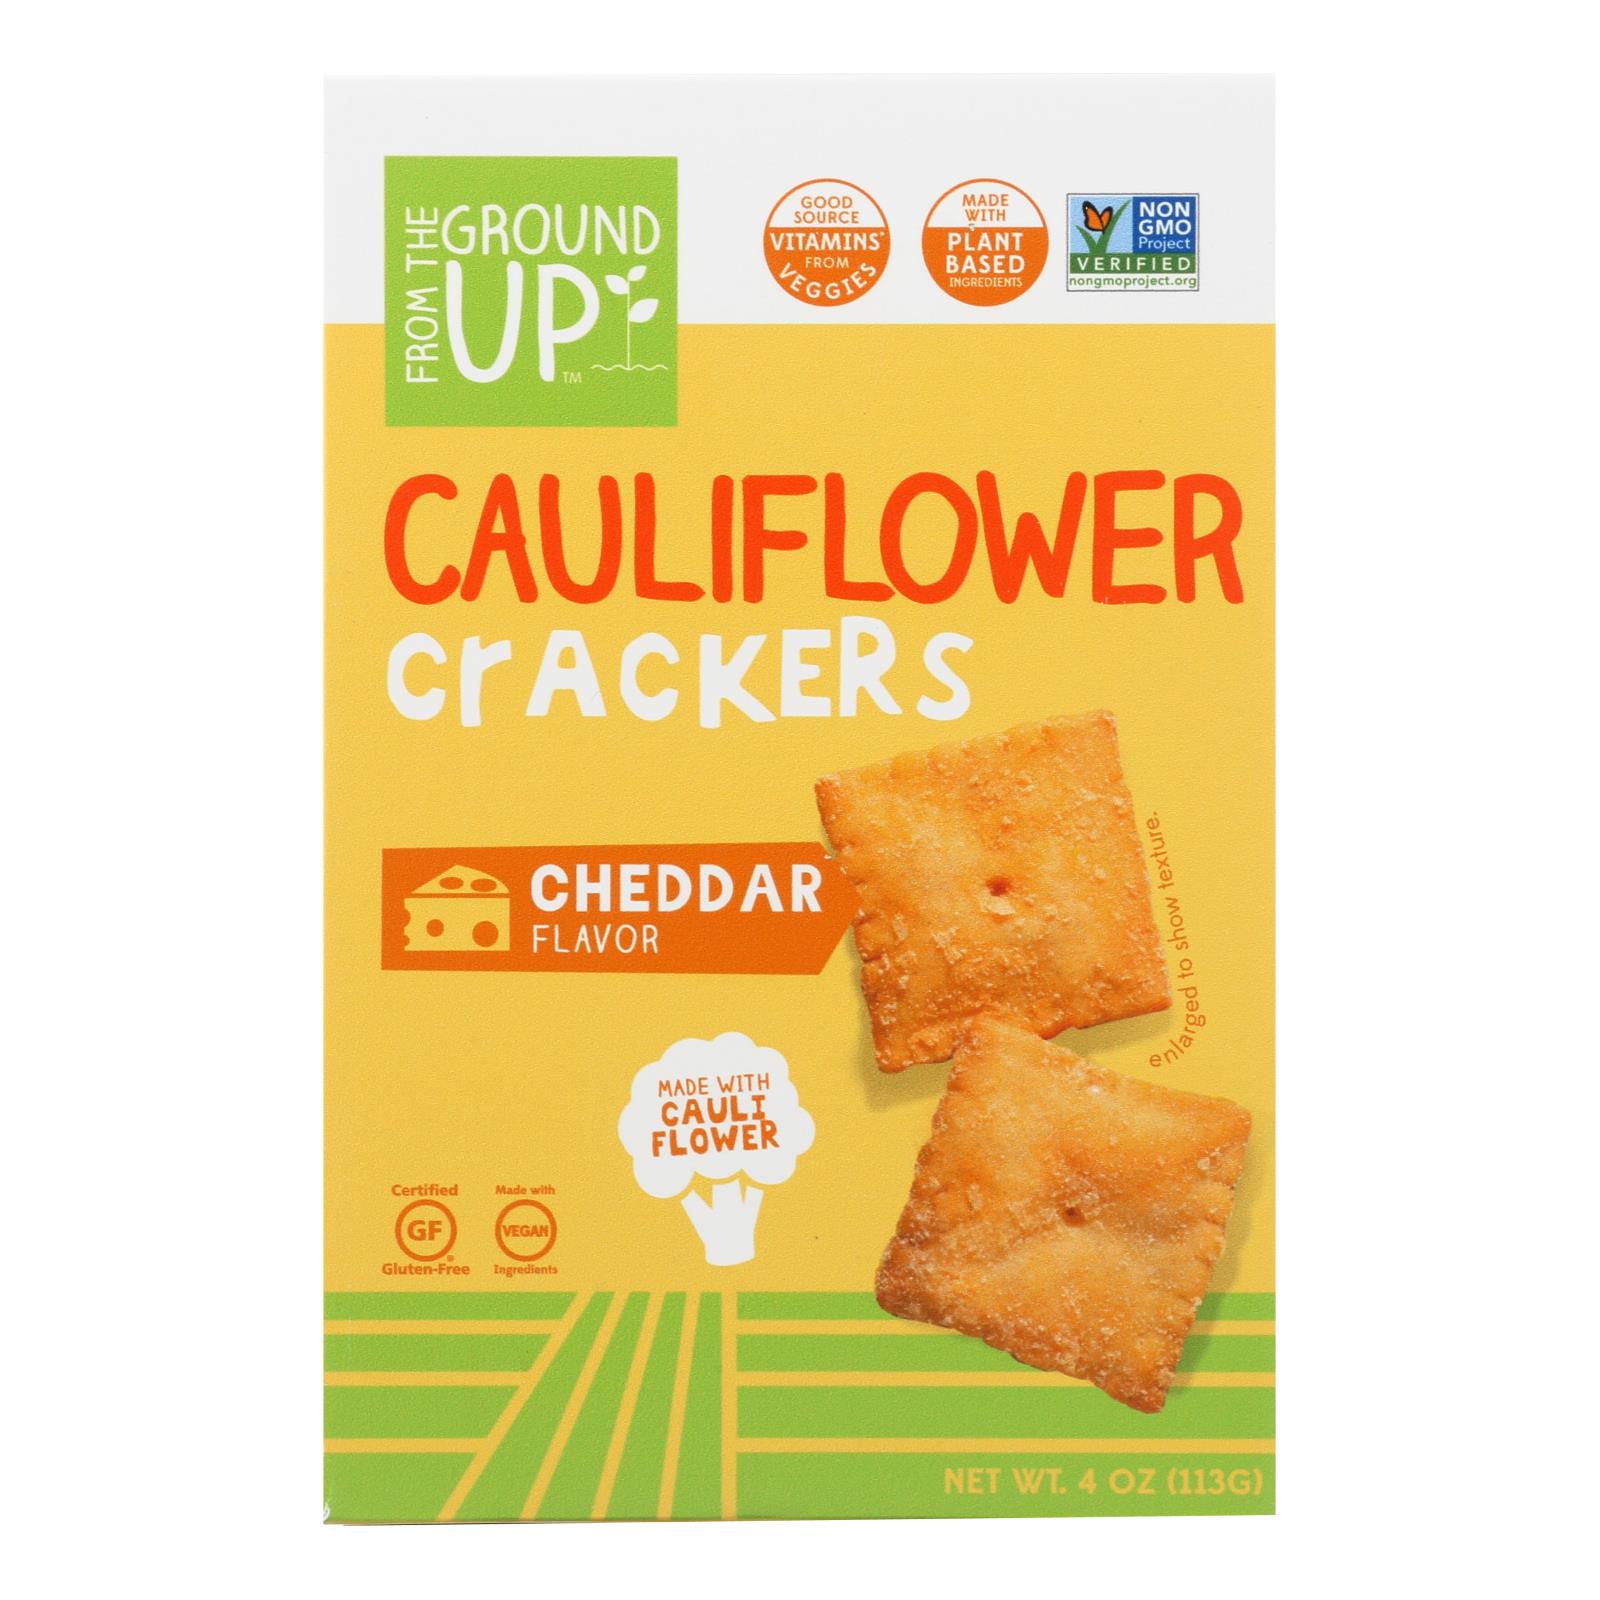 From The Ground Up - Cauliflower Crackers - Cheddar - 6개 묶음상품 - 4 oz.